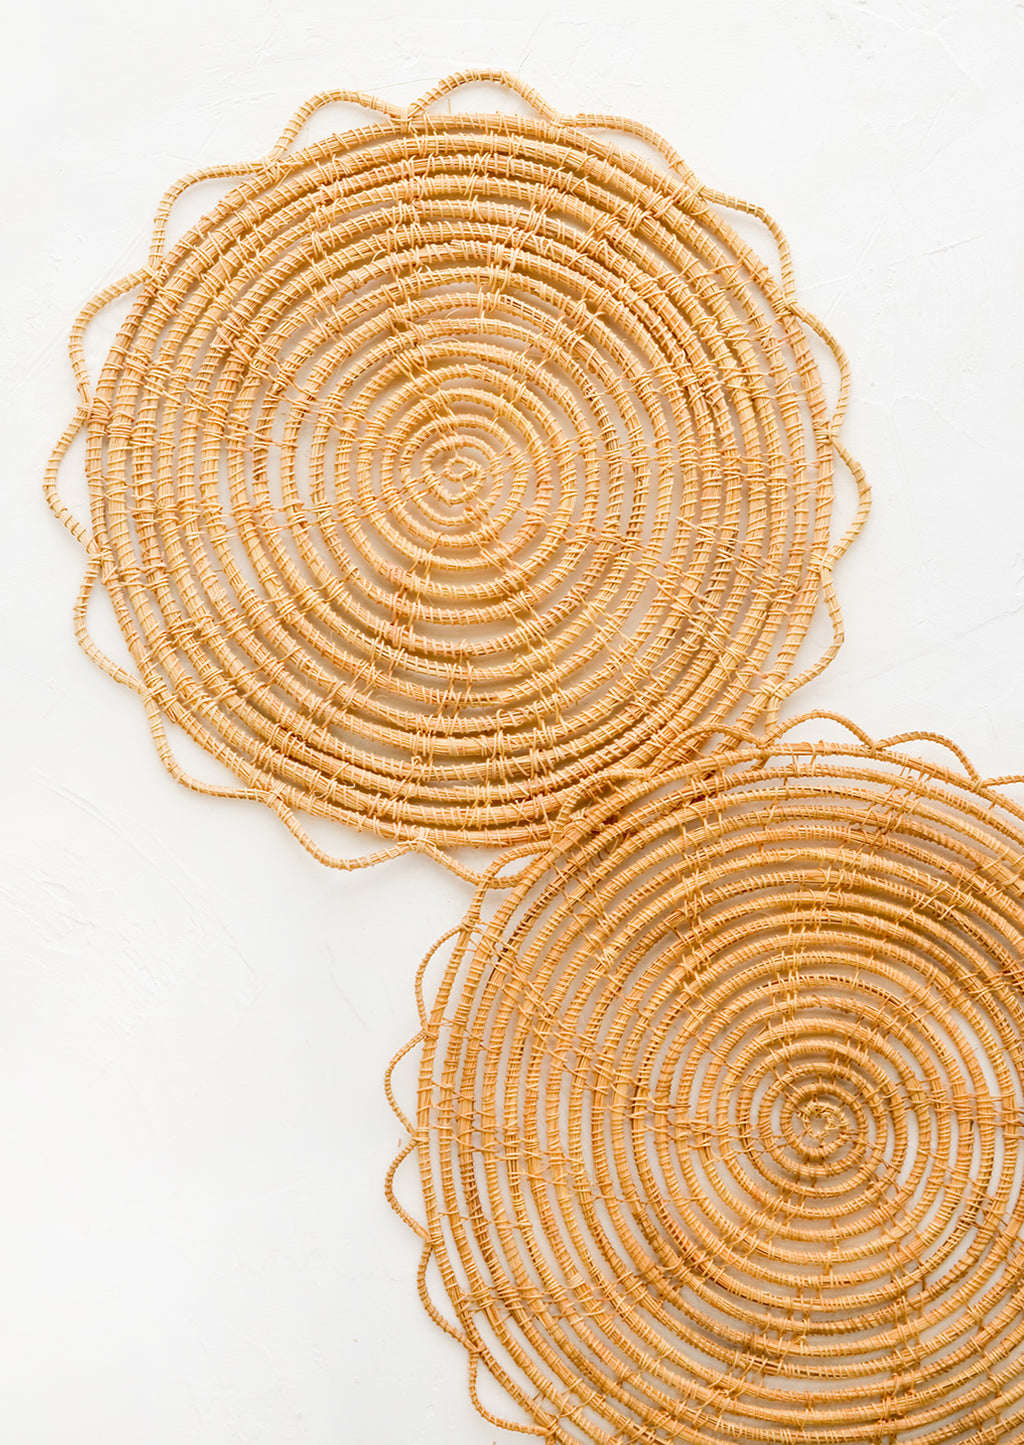 3: A round placemat set with open weave scalloped edge.